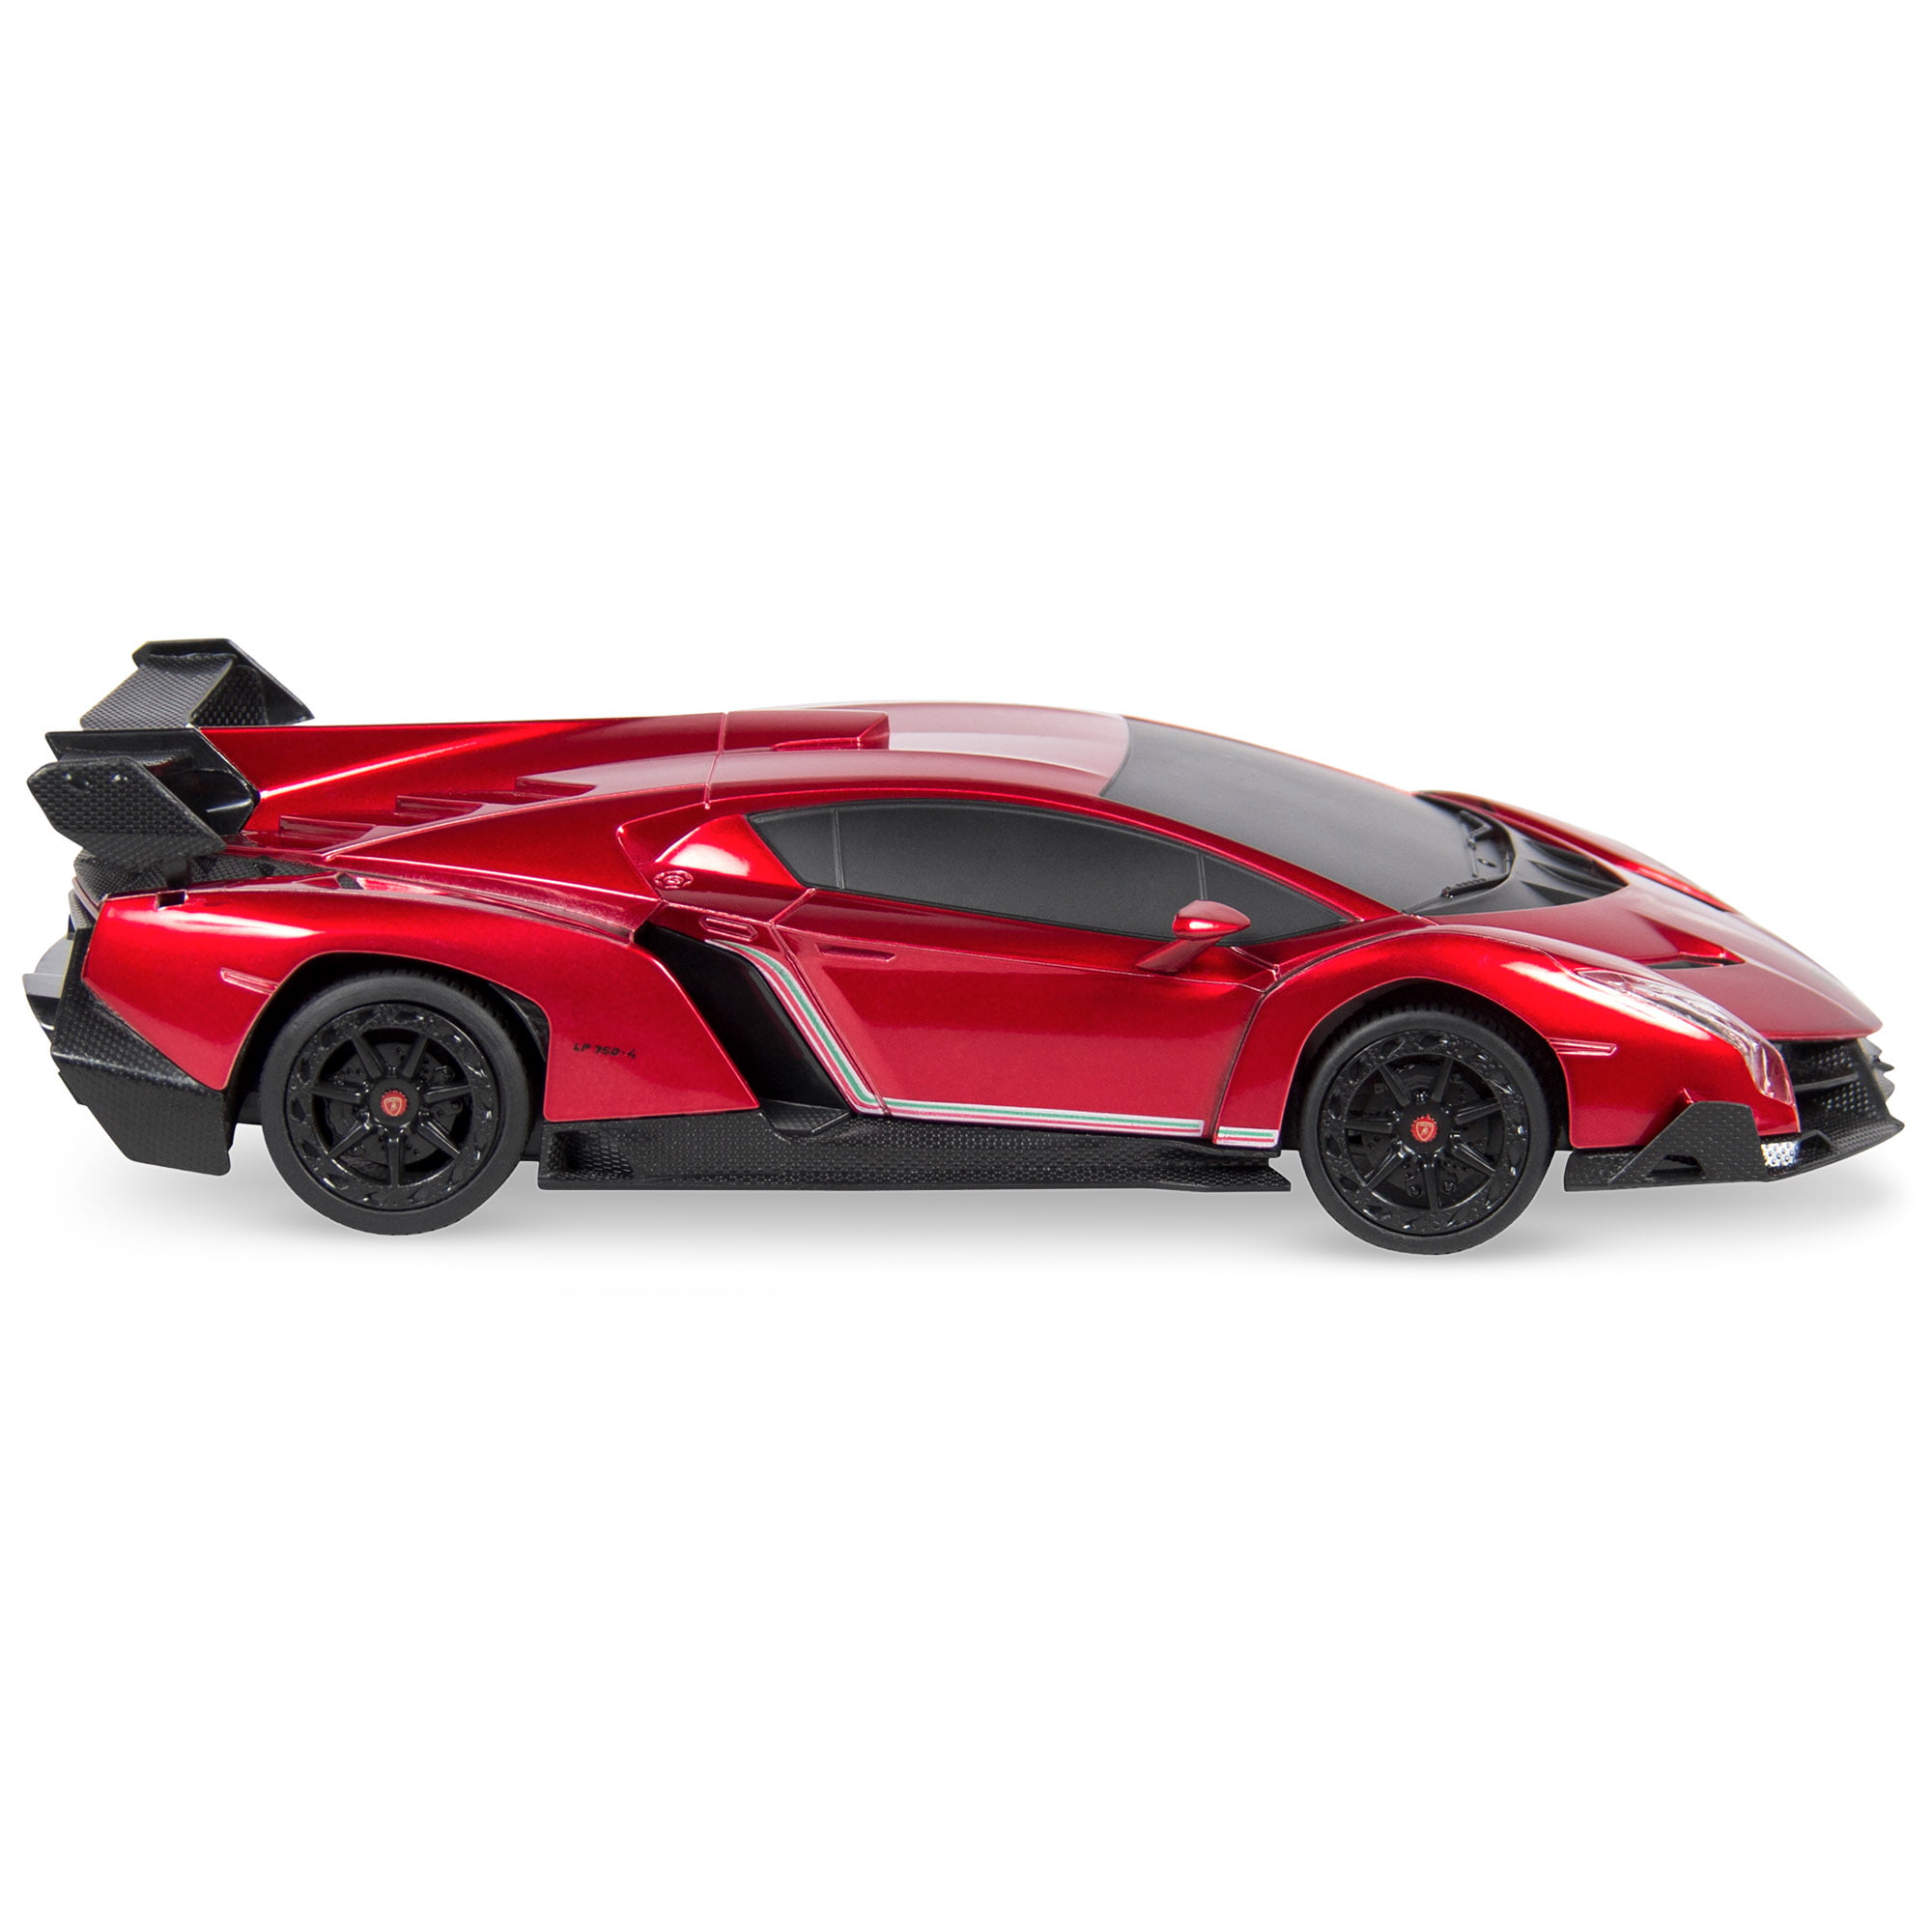 Best Choice Products 1/24 Officially Licensed RC Lamborghini Veneno Sport Racing Car W/ 27MHz Remote Controller 